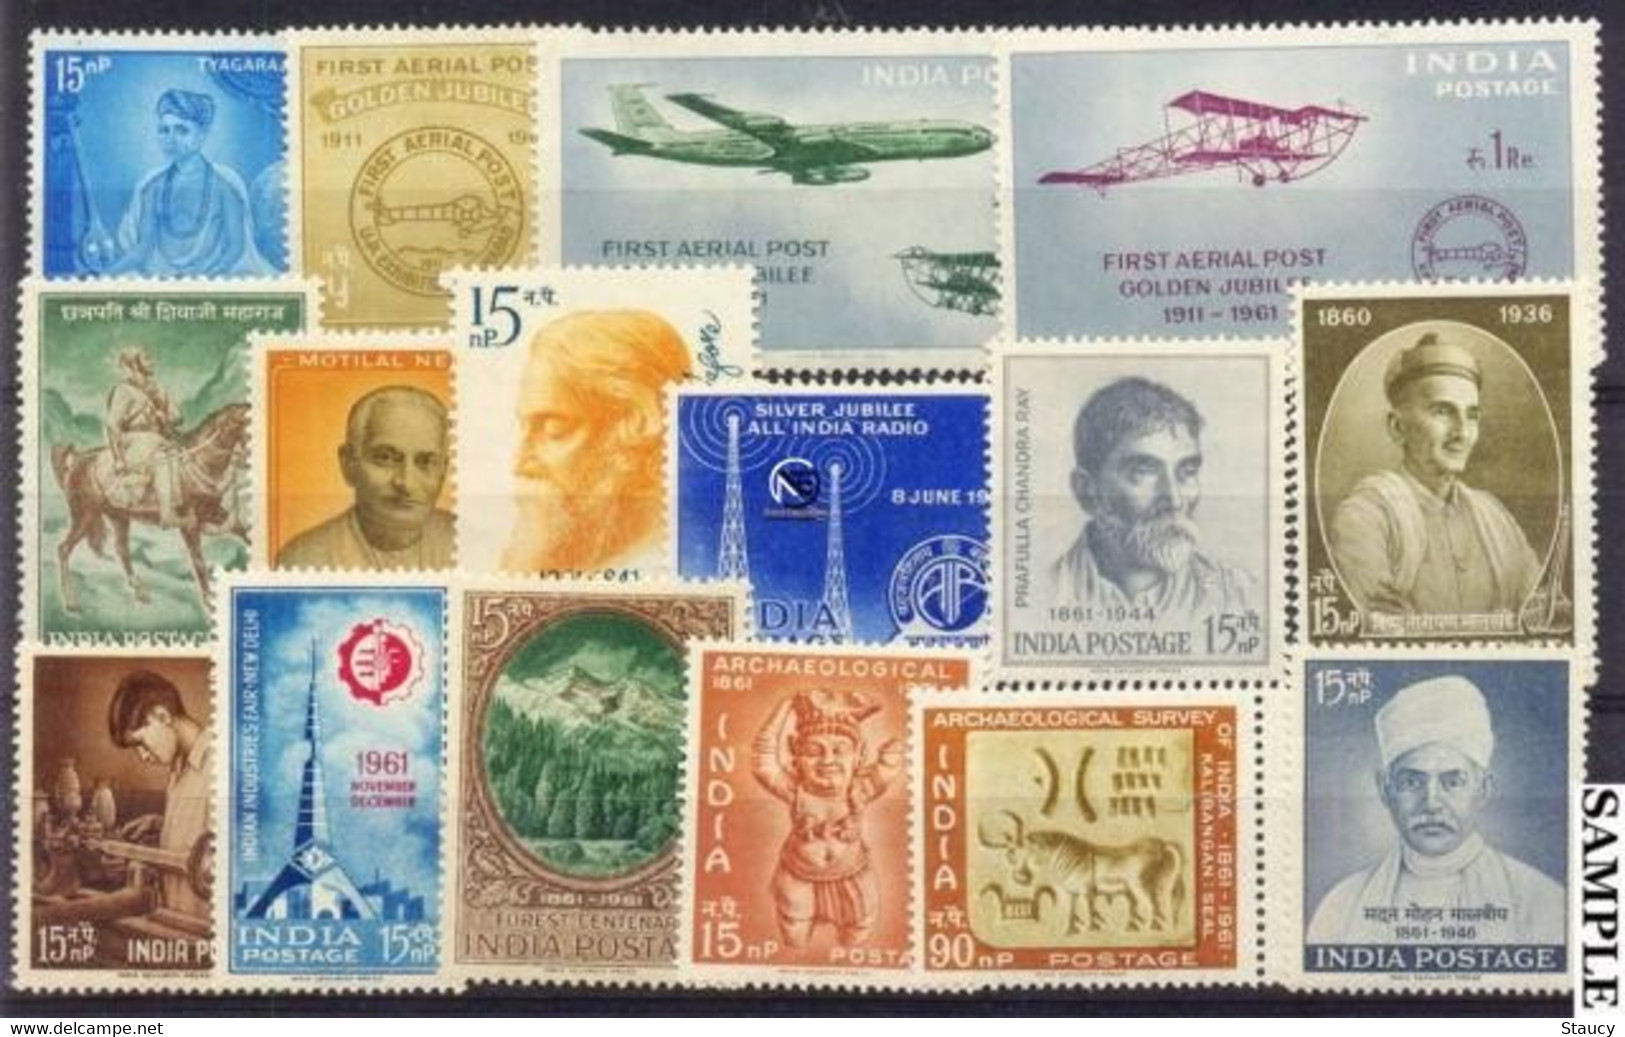 India 1961 Complete Year Pack / Set / Collection Total 16 Stamps (No Missing) MNH As Per Scan - Annate Complete